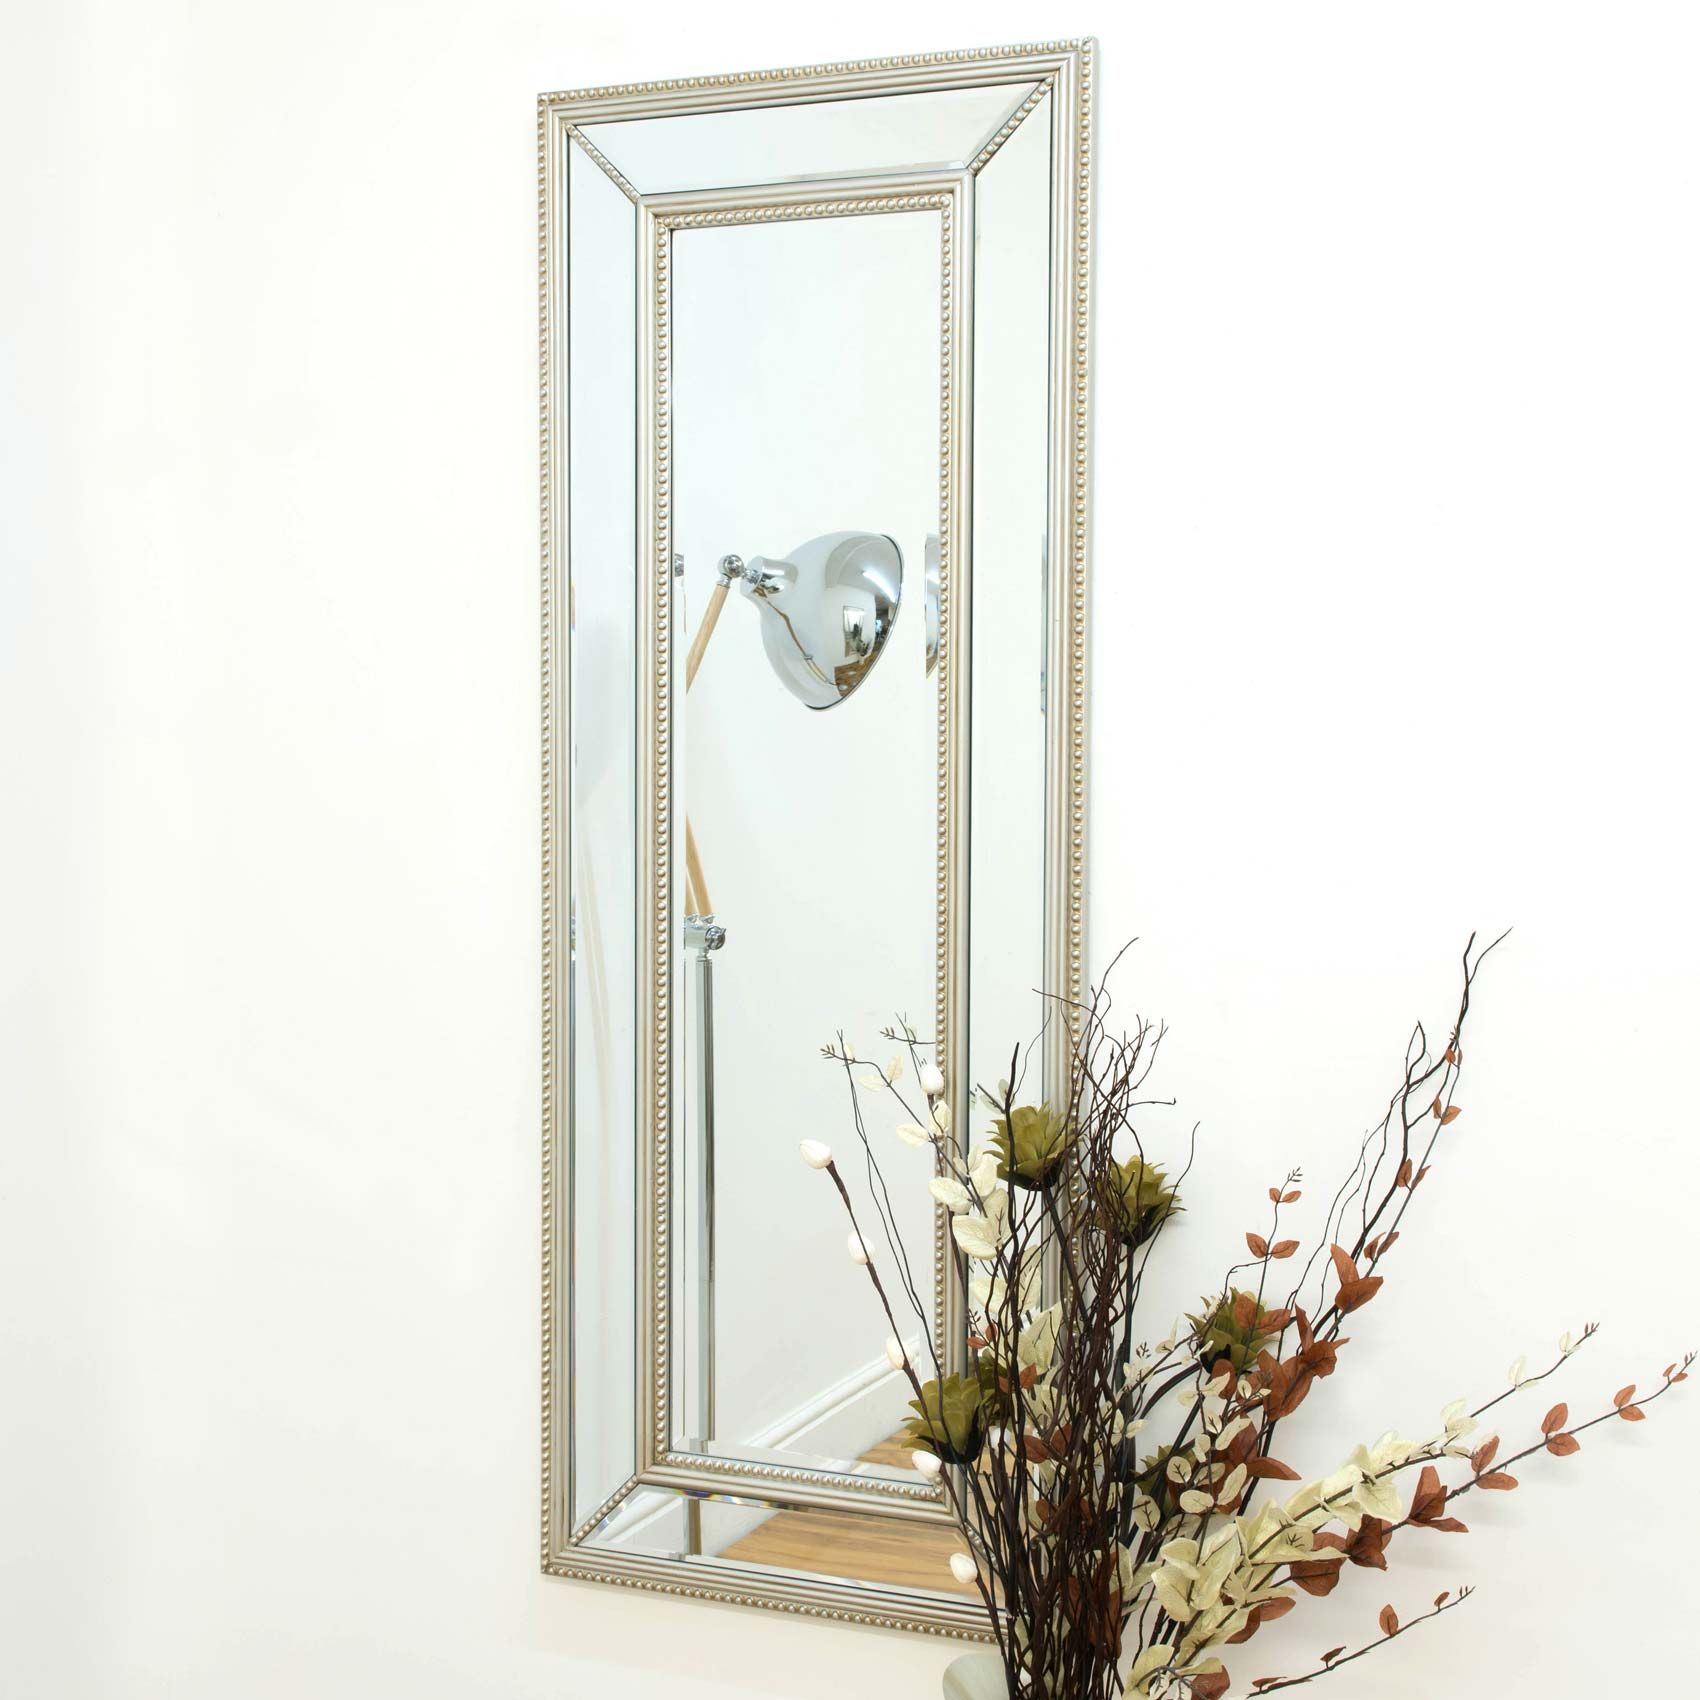 Large Silver Beaded Edge Modern All Glass Wall Mirror 4Ft11 X 1Ft11 With Regard To Edged Wall Mirrors (View 9 of 15)